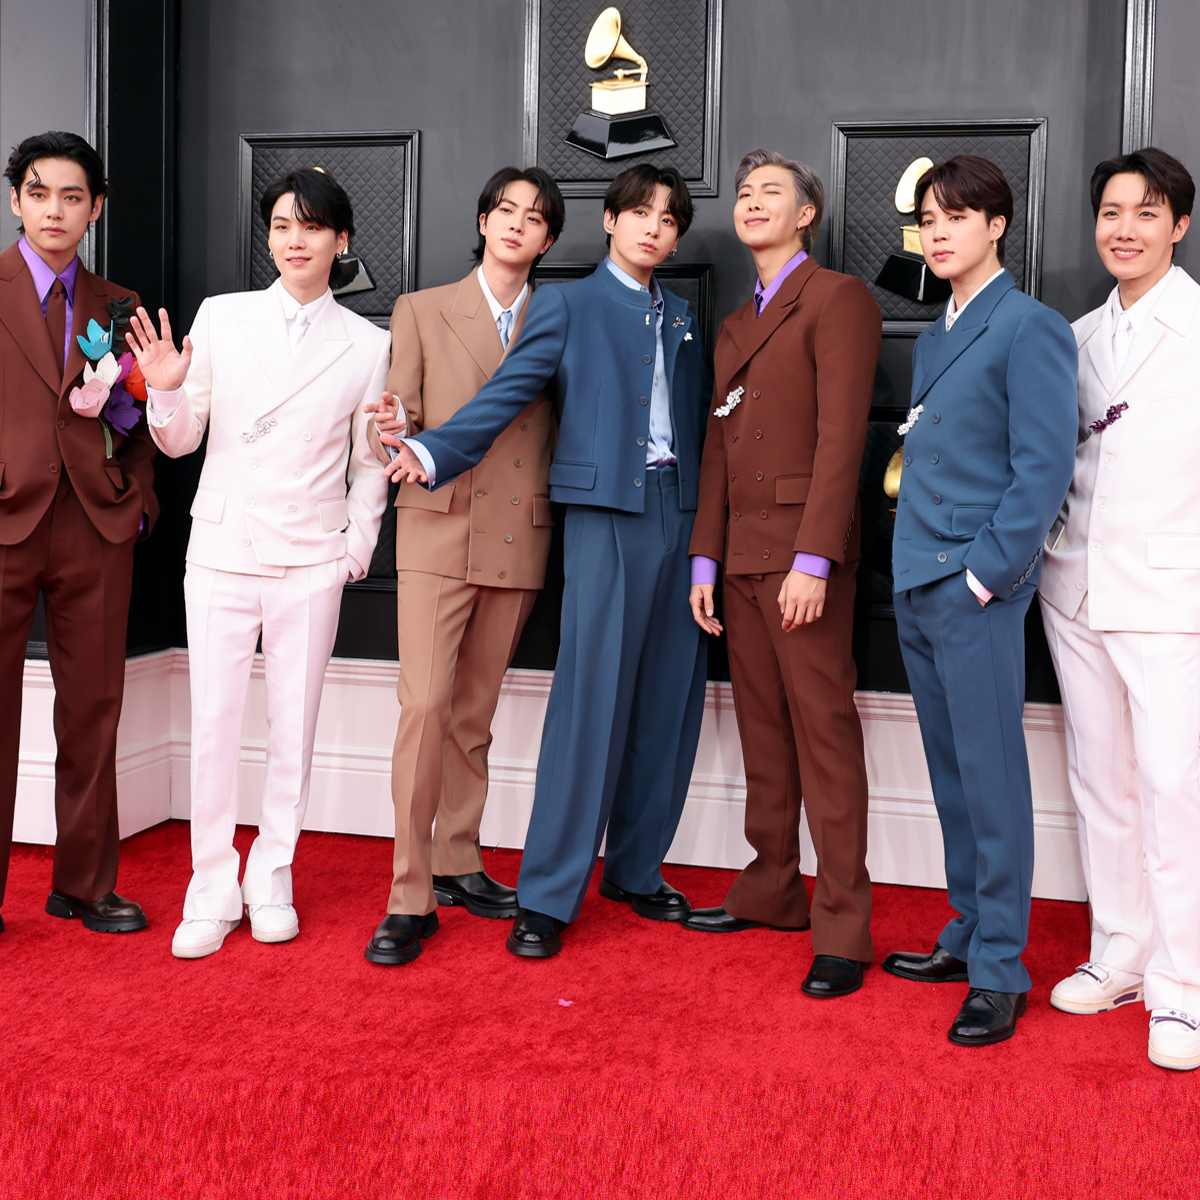 BTS Channels James Bond Vibes for 2022 Grammys Performance of 'Butter